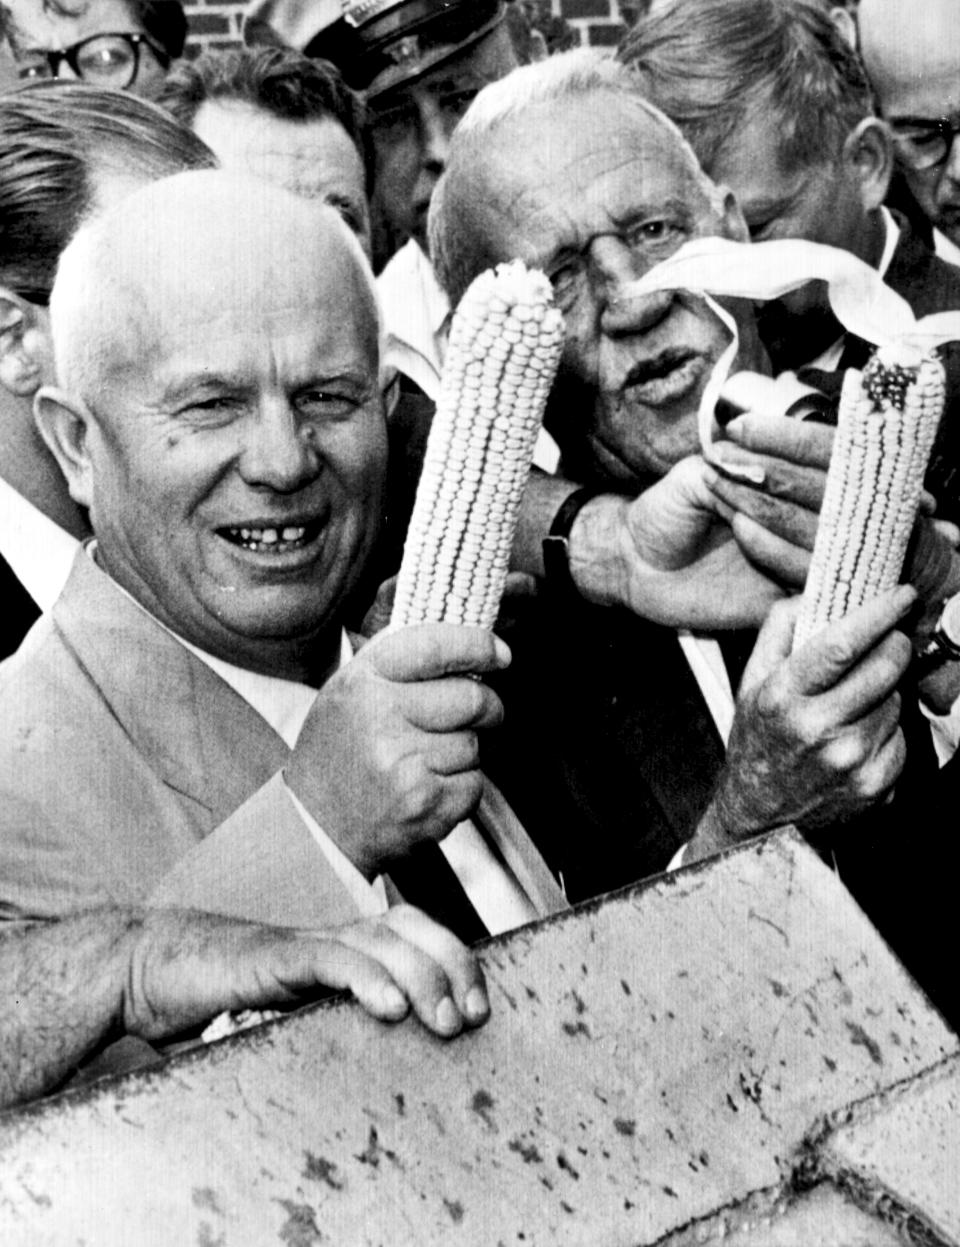 FILE - In this Sept. 23, 1959, file photo, Soviet Premier Nikita Khrushchev and Roswell Garst pose with corn cobs during an inspection tour of The Garst Farm in Coon Rapids, Iowa. Khrushchev became the first Soviet leader to visit the U.S. He traveled to Washington, New York, California and Iowa and held meetings with President Dwight Eisenhower. (AP Photo/File)